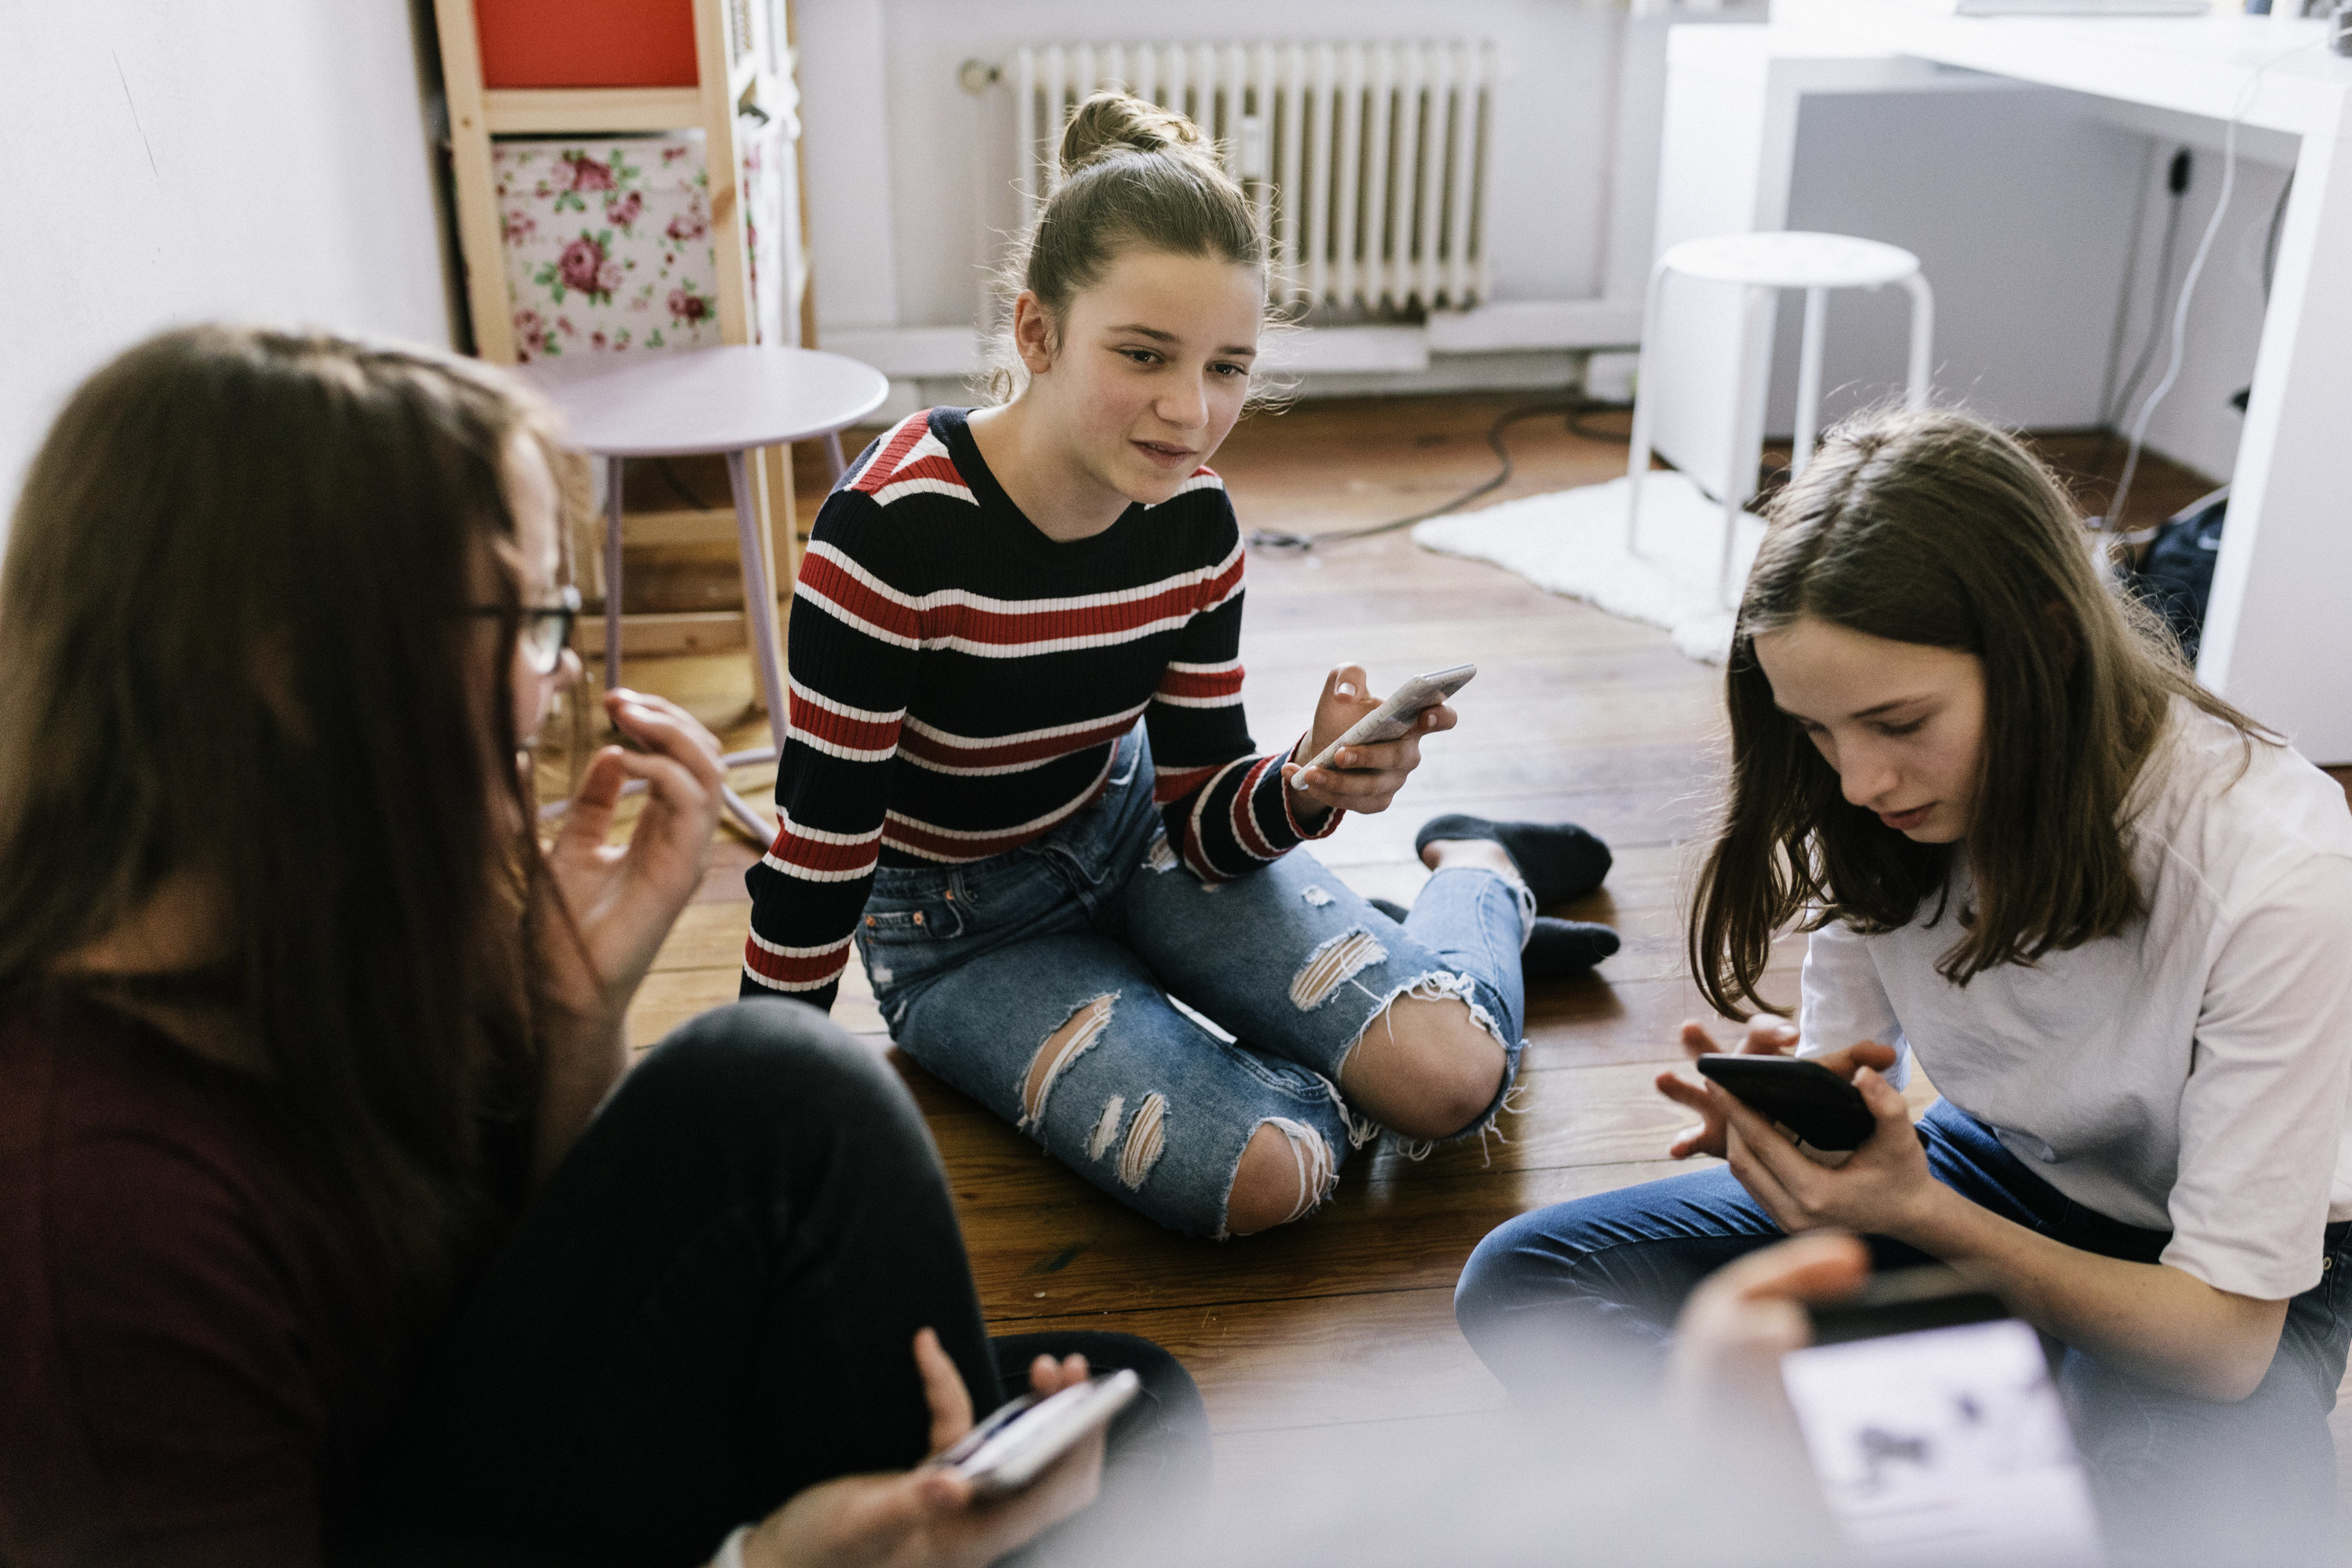 Pre-teen girls look at their phones and talk to each other in the middle of a bedroom.